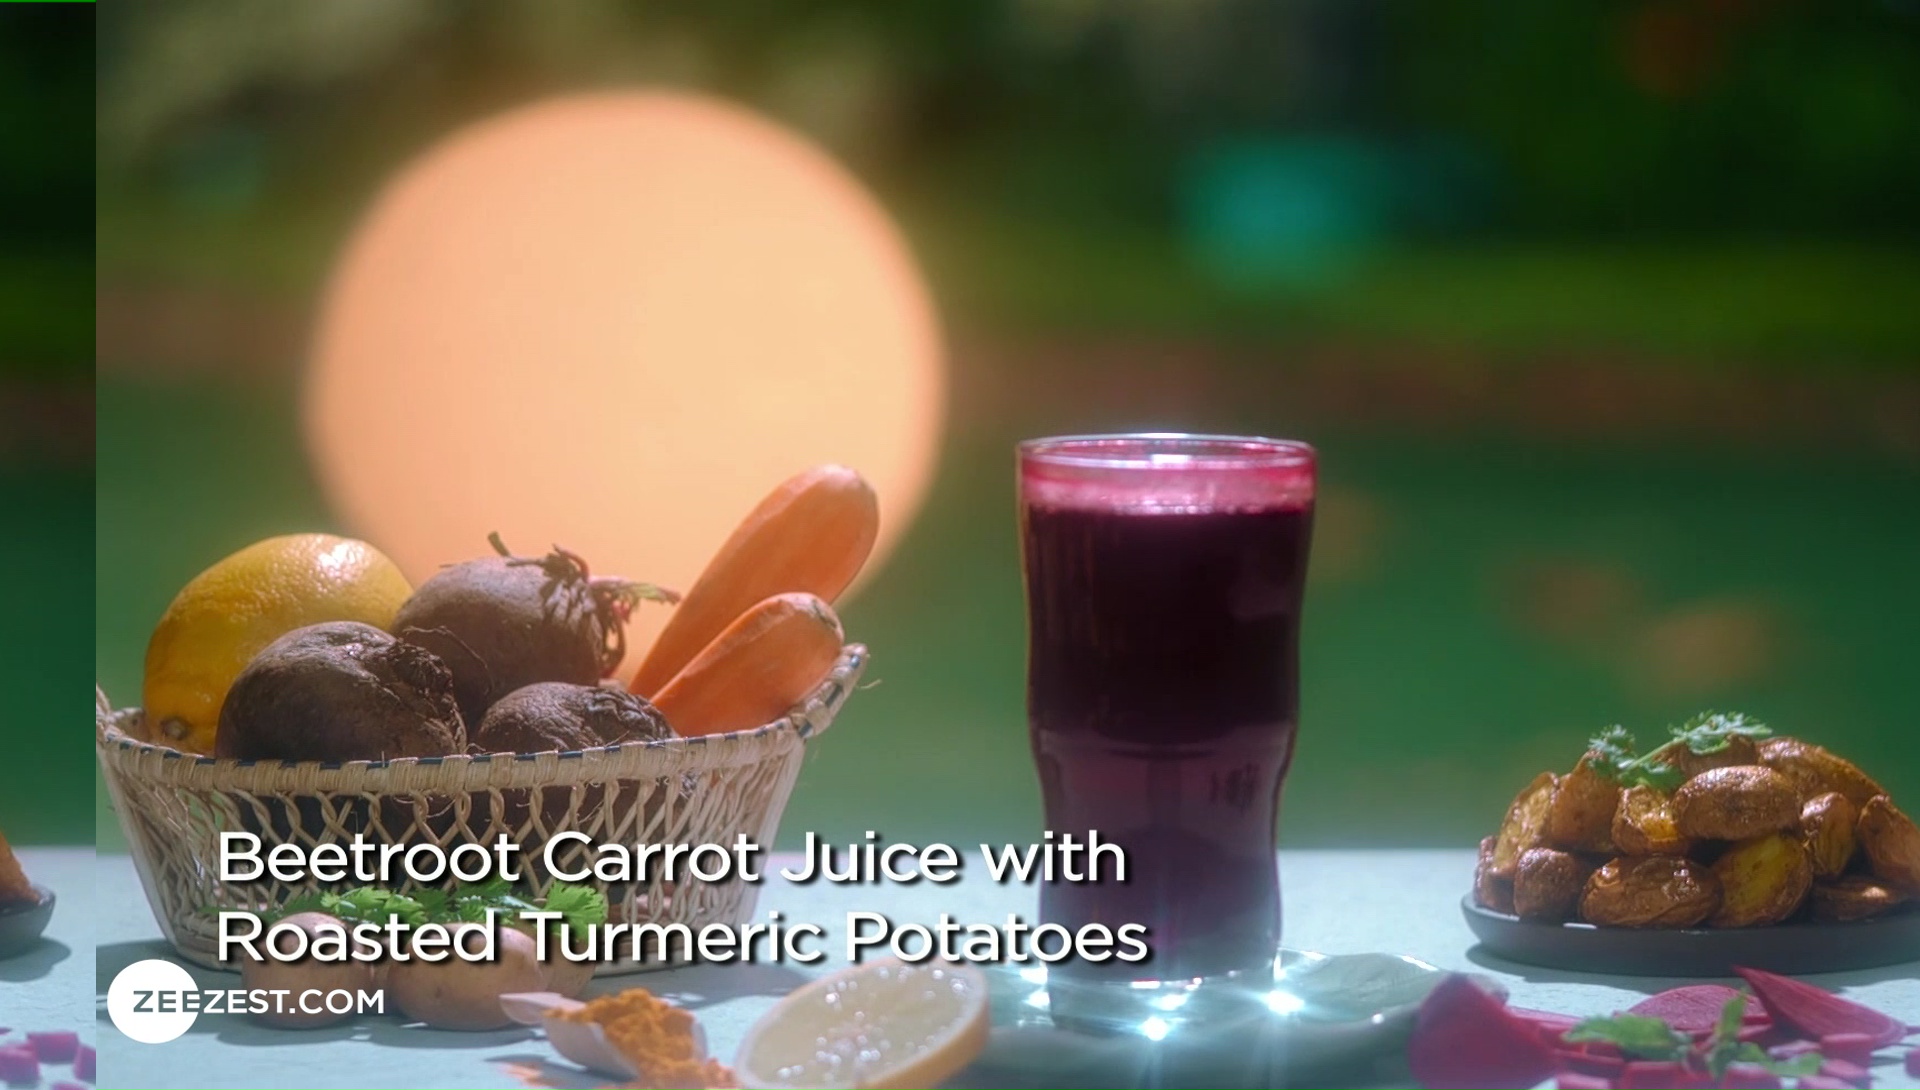 Roasted Turmeric Potatoes with Beetroot Carrot Juice